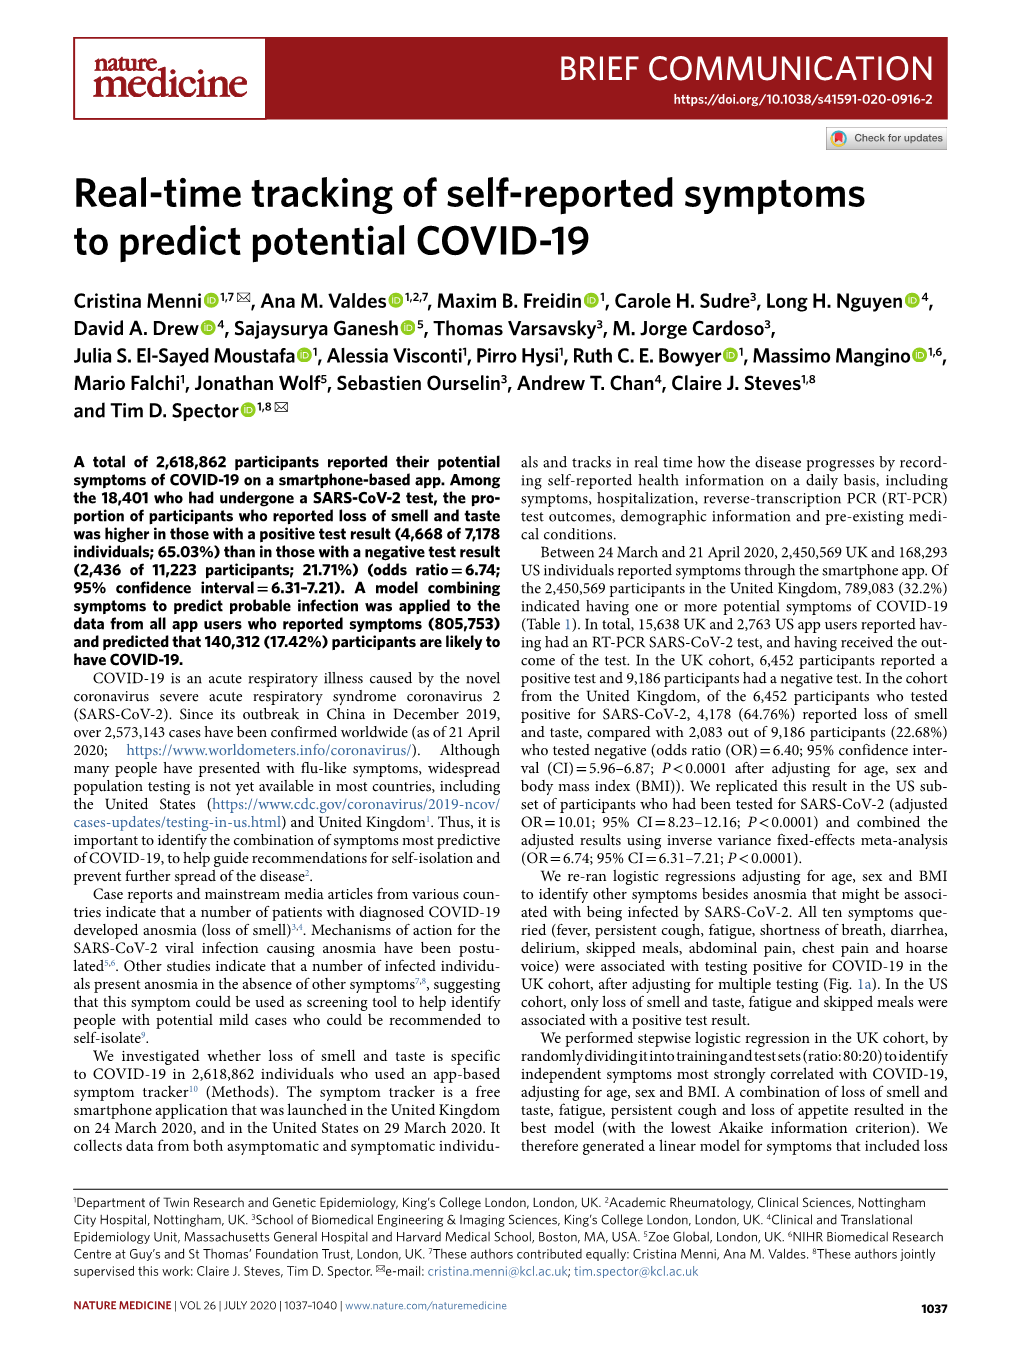 Real-Time Tracking of Self-Reported Symptoms to Predict Potential COVID-19